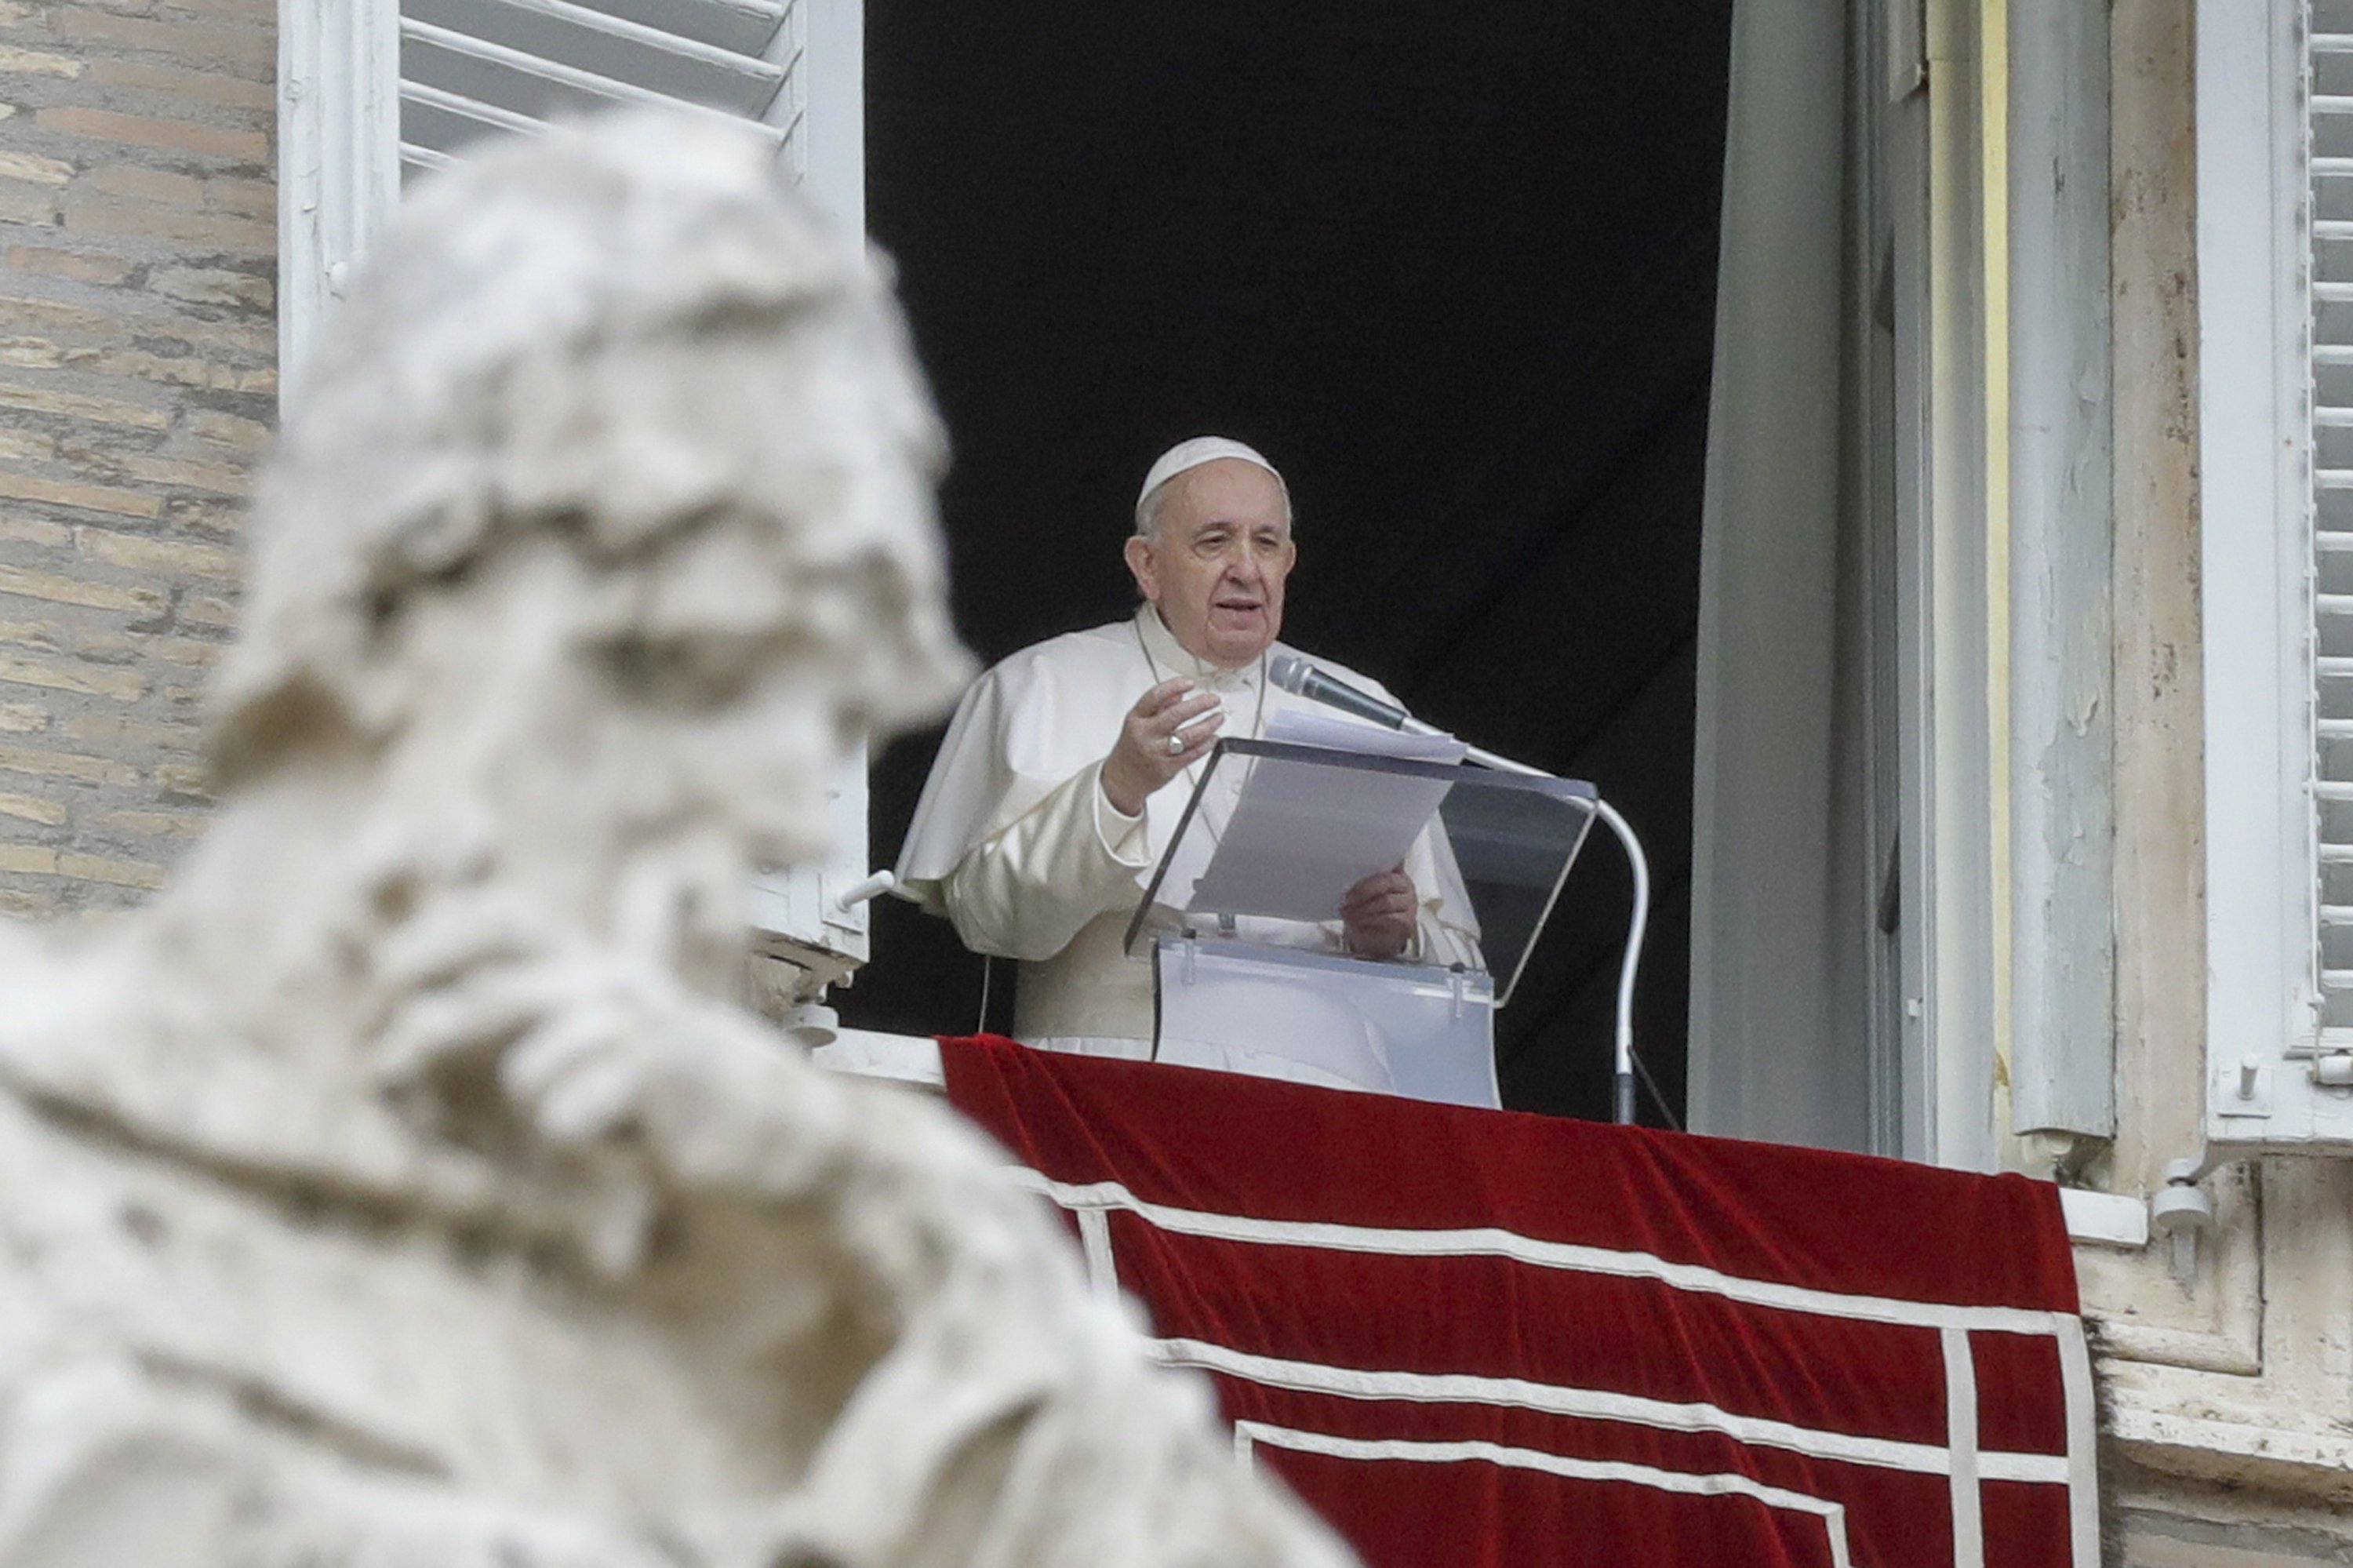 Pope marking Holocaust warns another genocide possible - The Associated Press